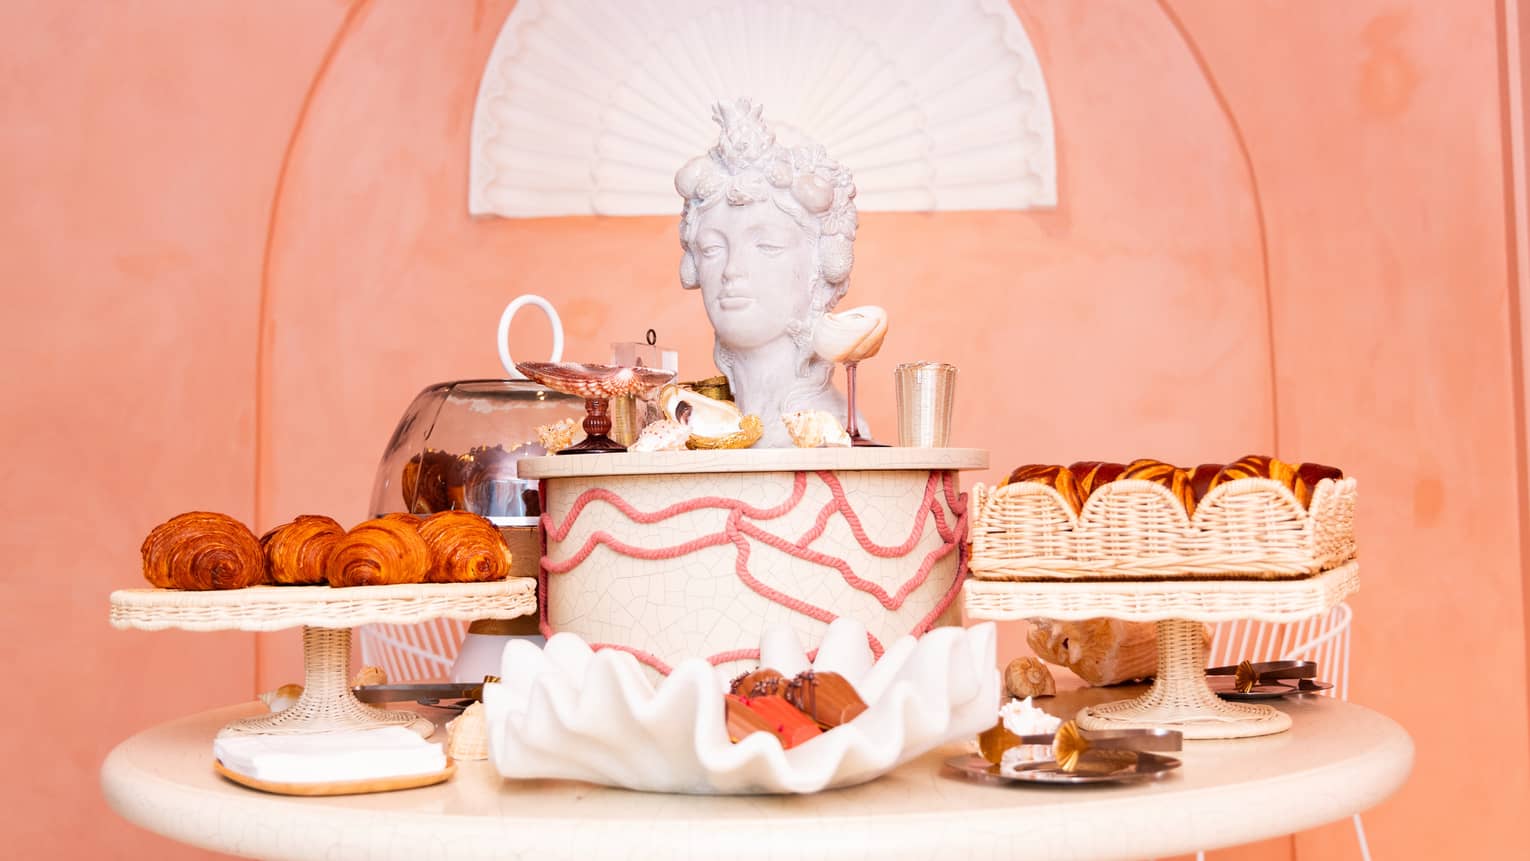 A display of pastries on a round table, with a Roman head of a woman as art